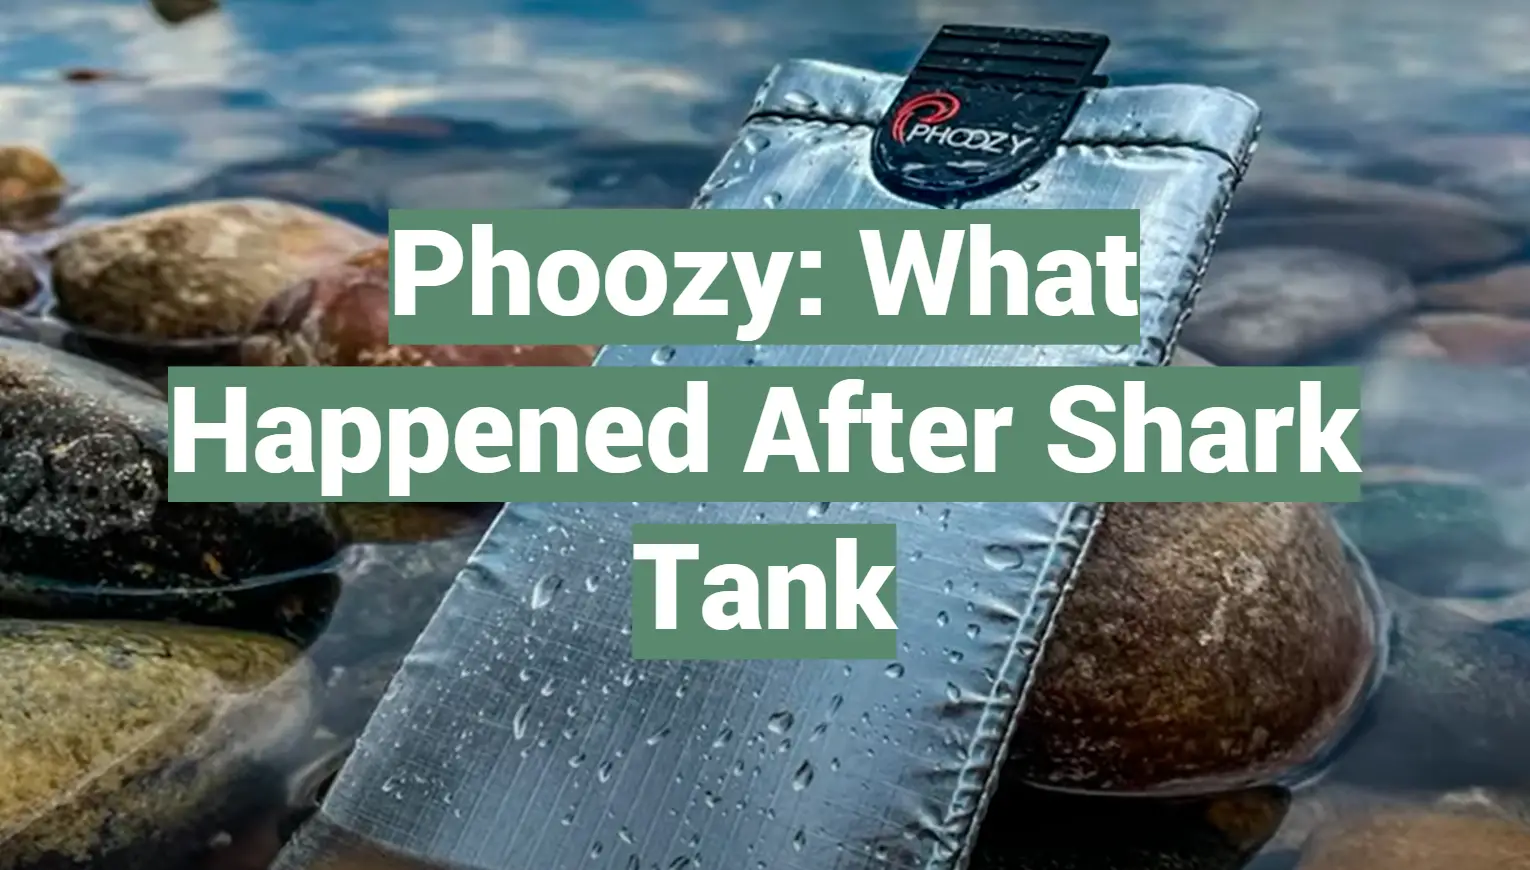 Phoozy: What Happened After Shark Tank